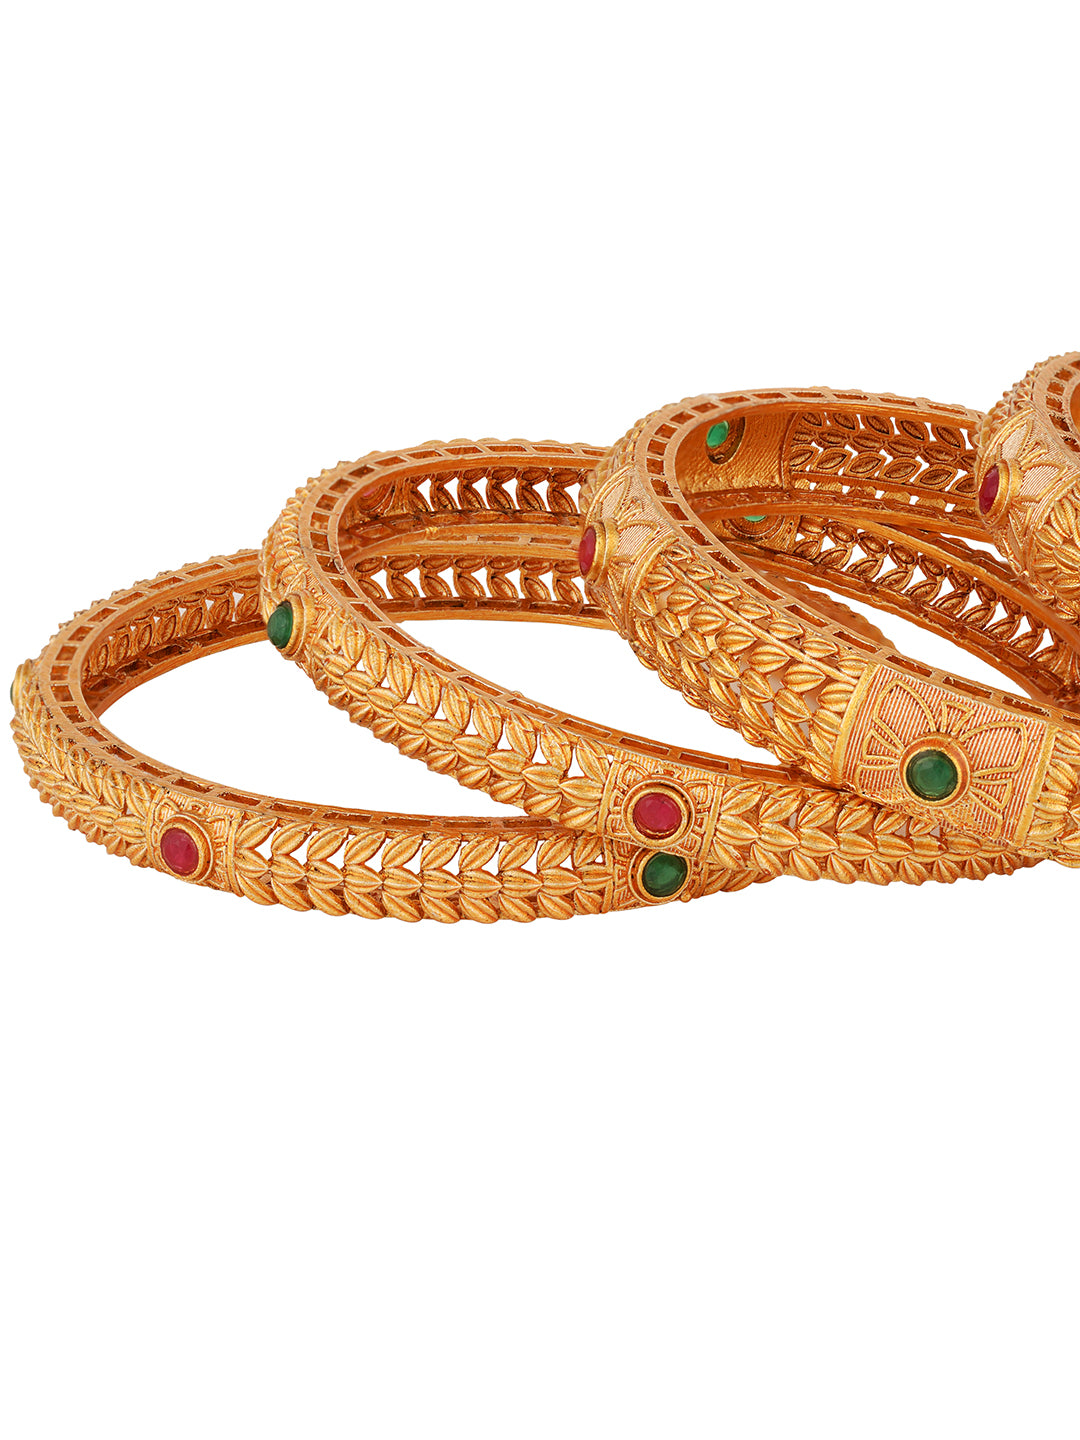 Set Of 6 24 CT Gold Plated Red Stone Studded Handcrafted Bangles For Regular Use